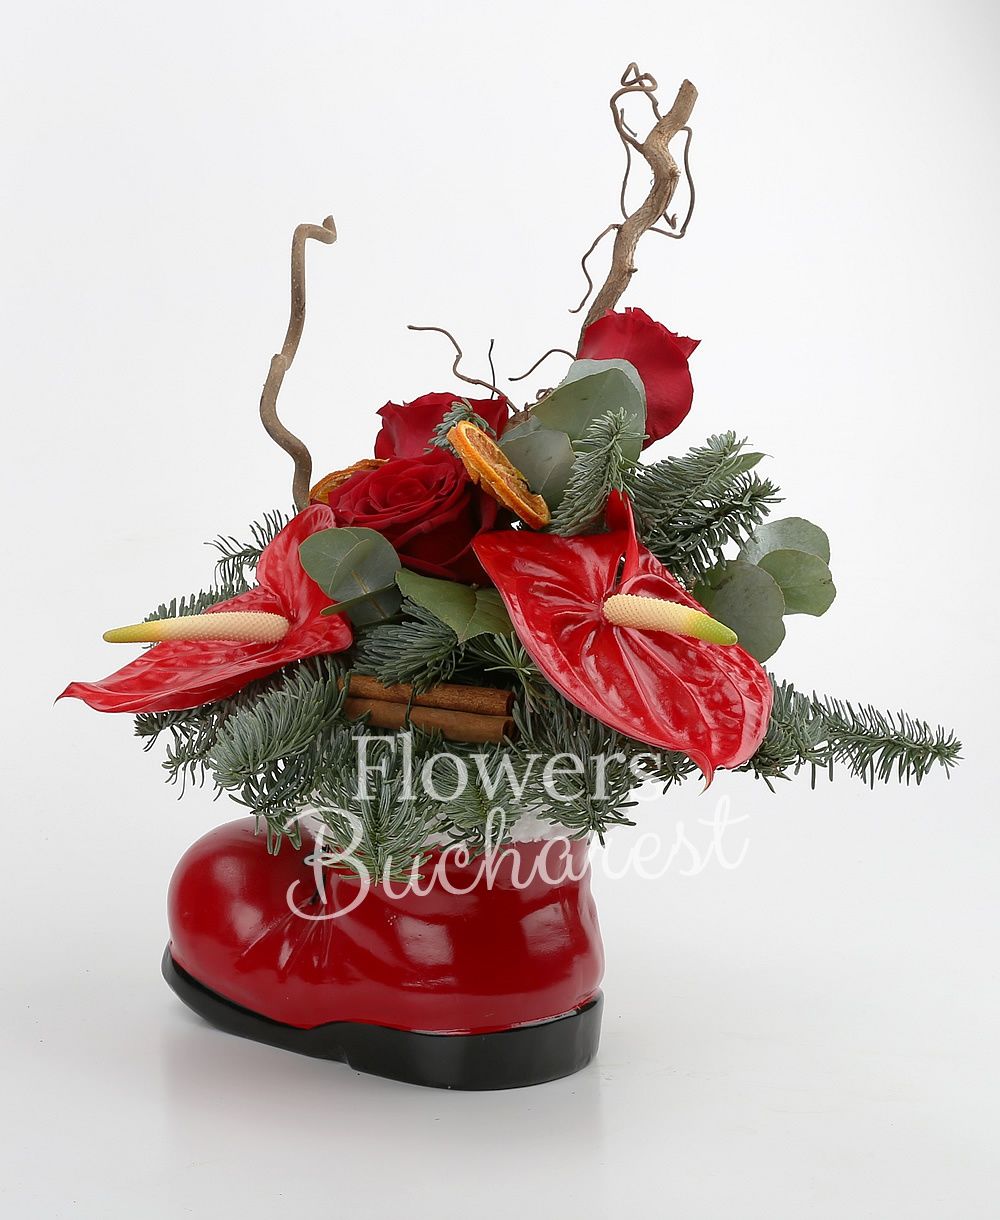 3 red roses, 2 red anthurium, corylus, dried orange slices, globes, greenery